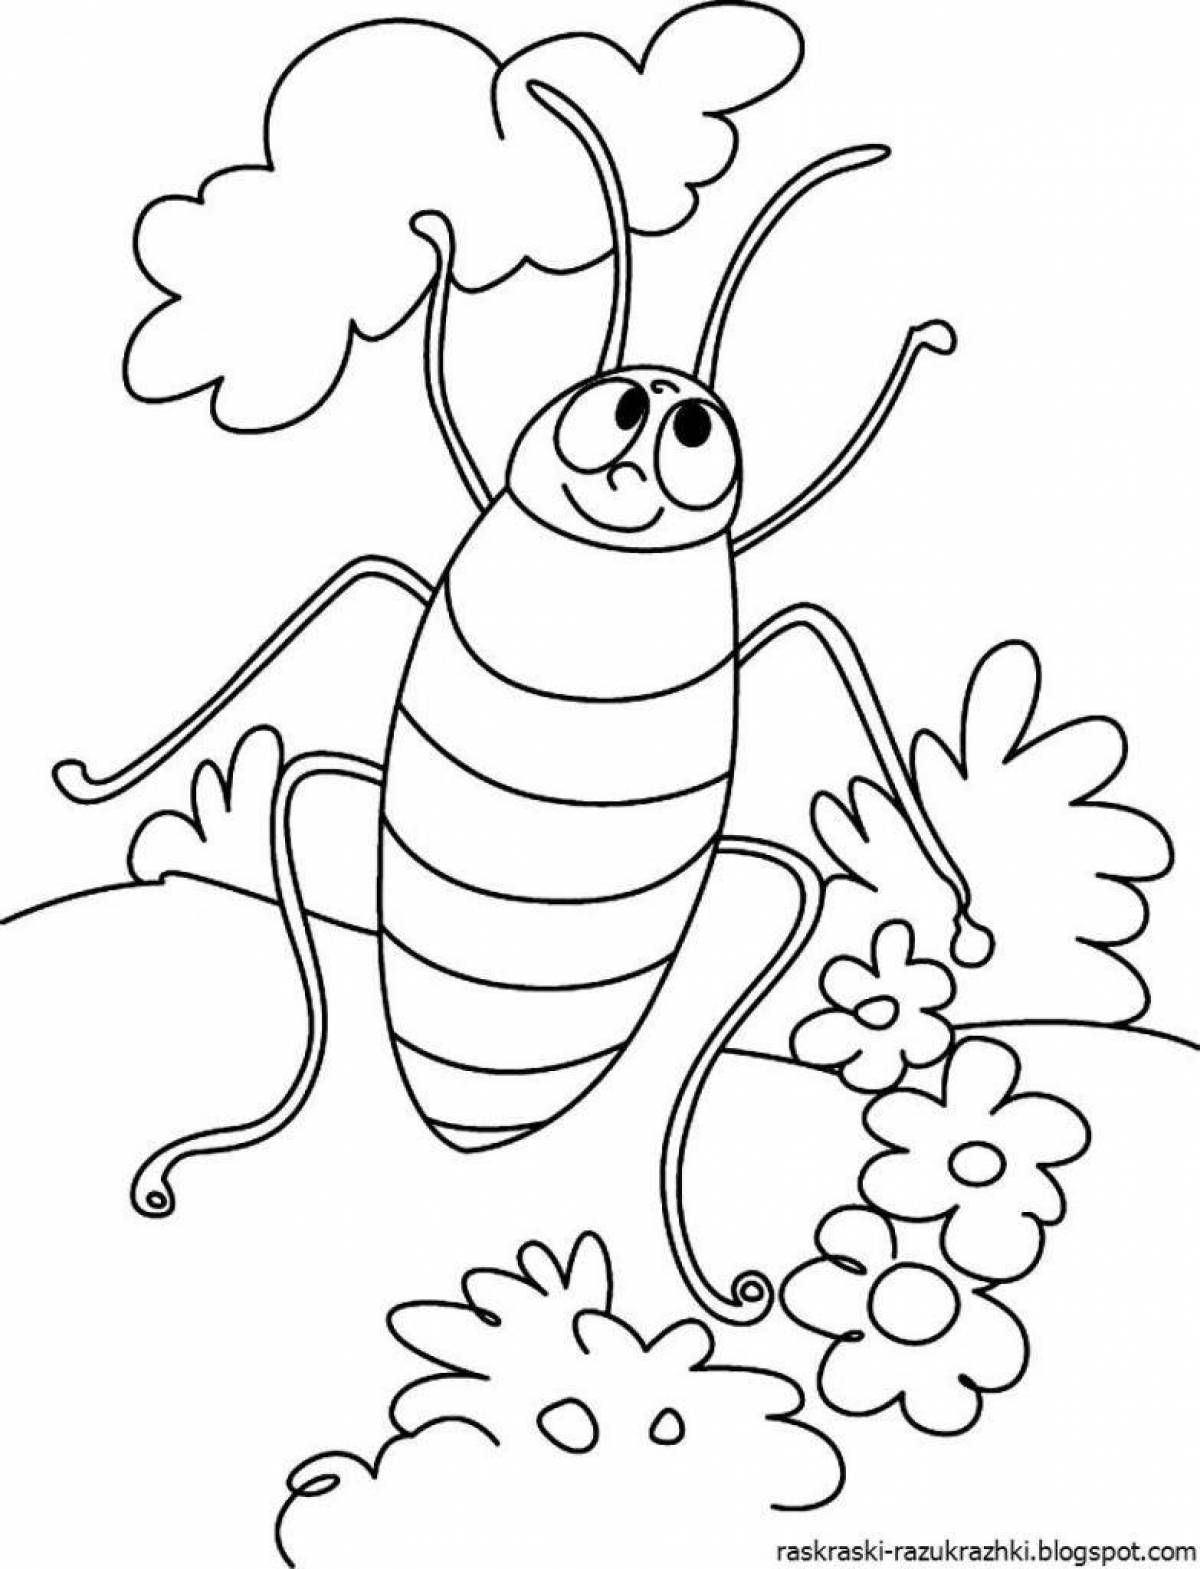 Chukovsky cockroach coloring page